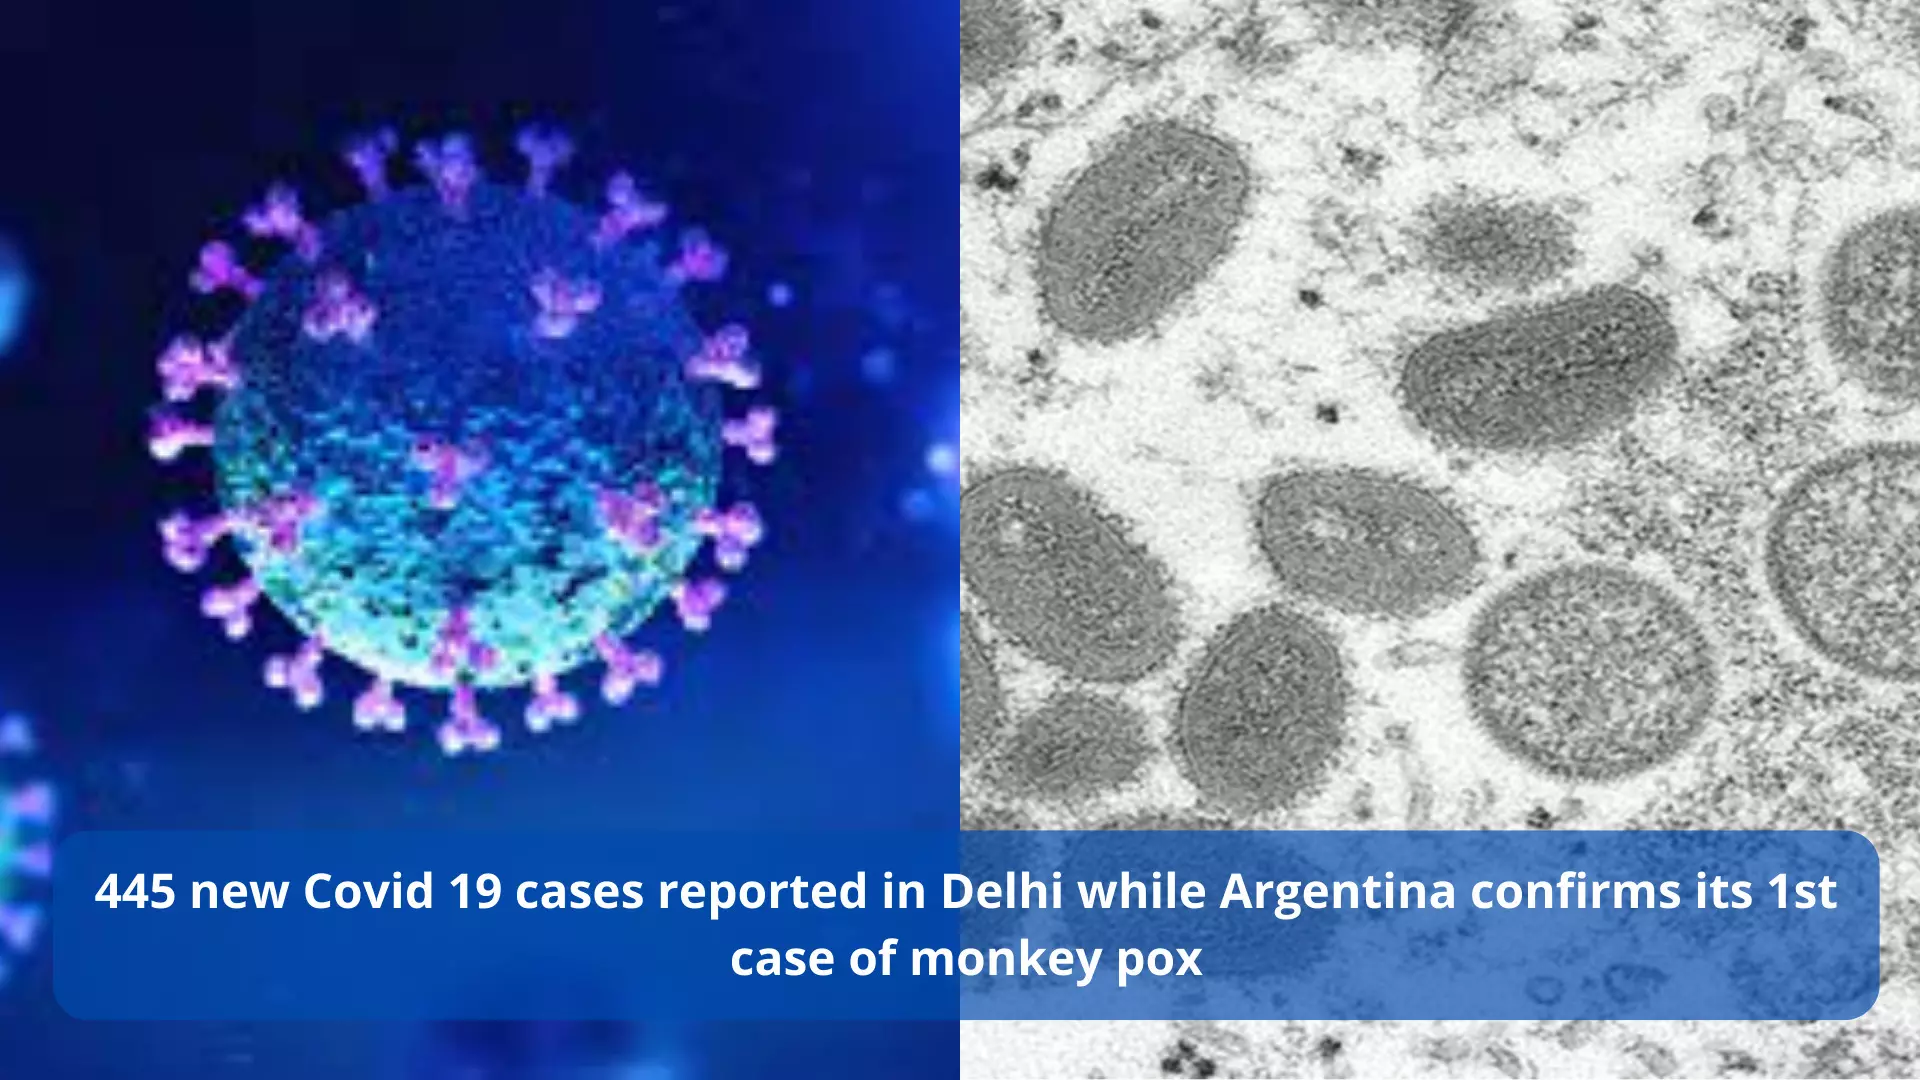 445 new COVID cases reported in Delhi while Argentina confirms its 1st case of monkey pox